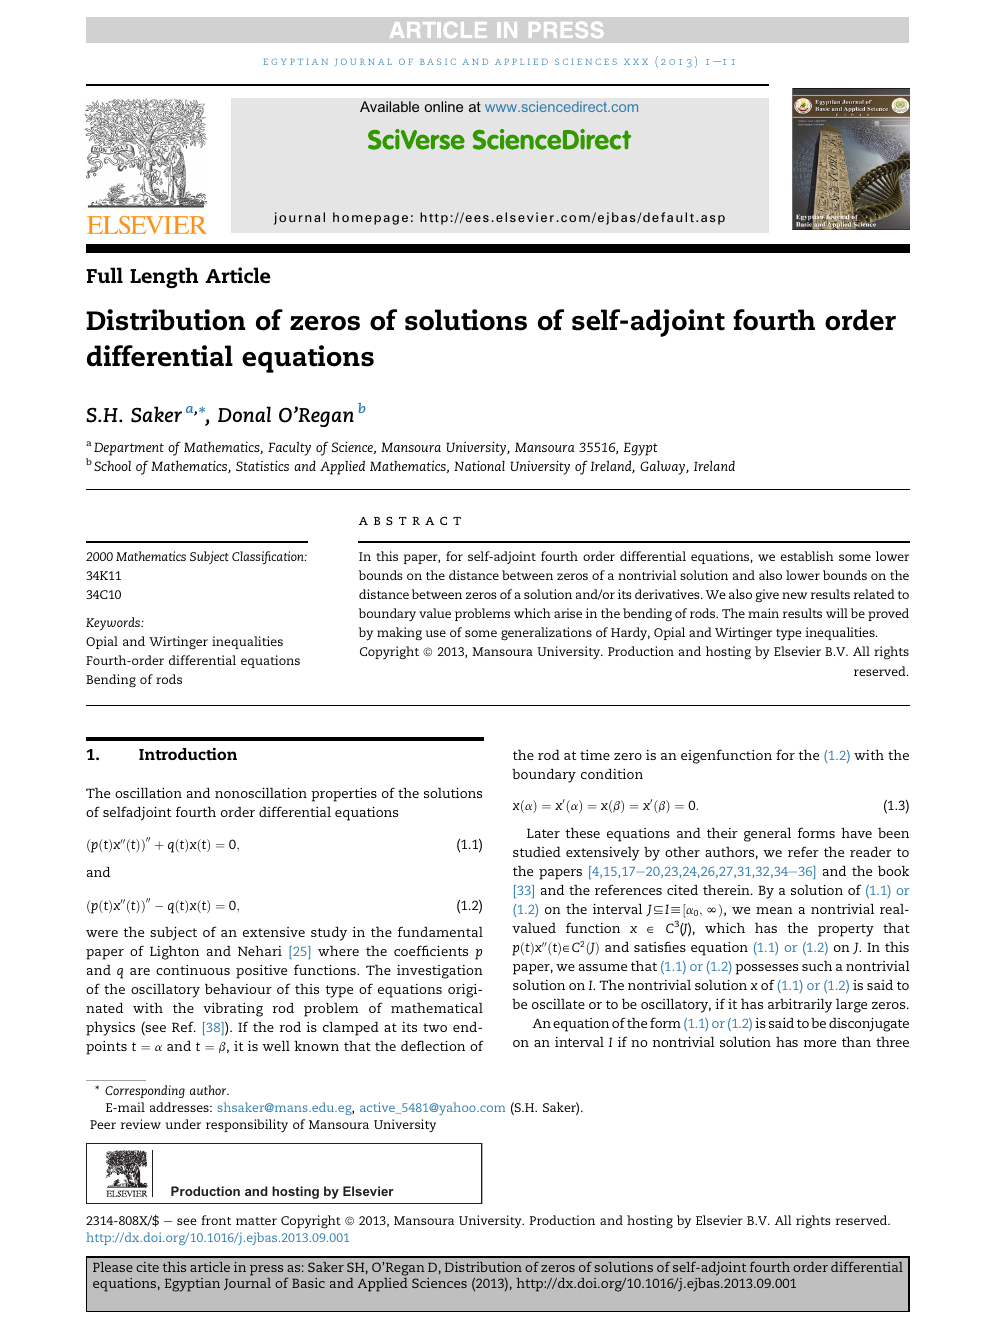 Distribution Of Zeros Of Solutions Of Self Adjoint Fourth Order Differential Equations Topic Of Research Paper In Mathematics Download Scholarly Article Pdf And Read For Free On Cyberleninka Open Science Hub